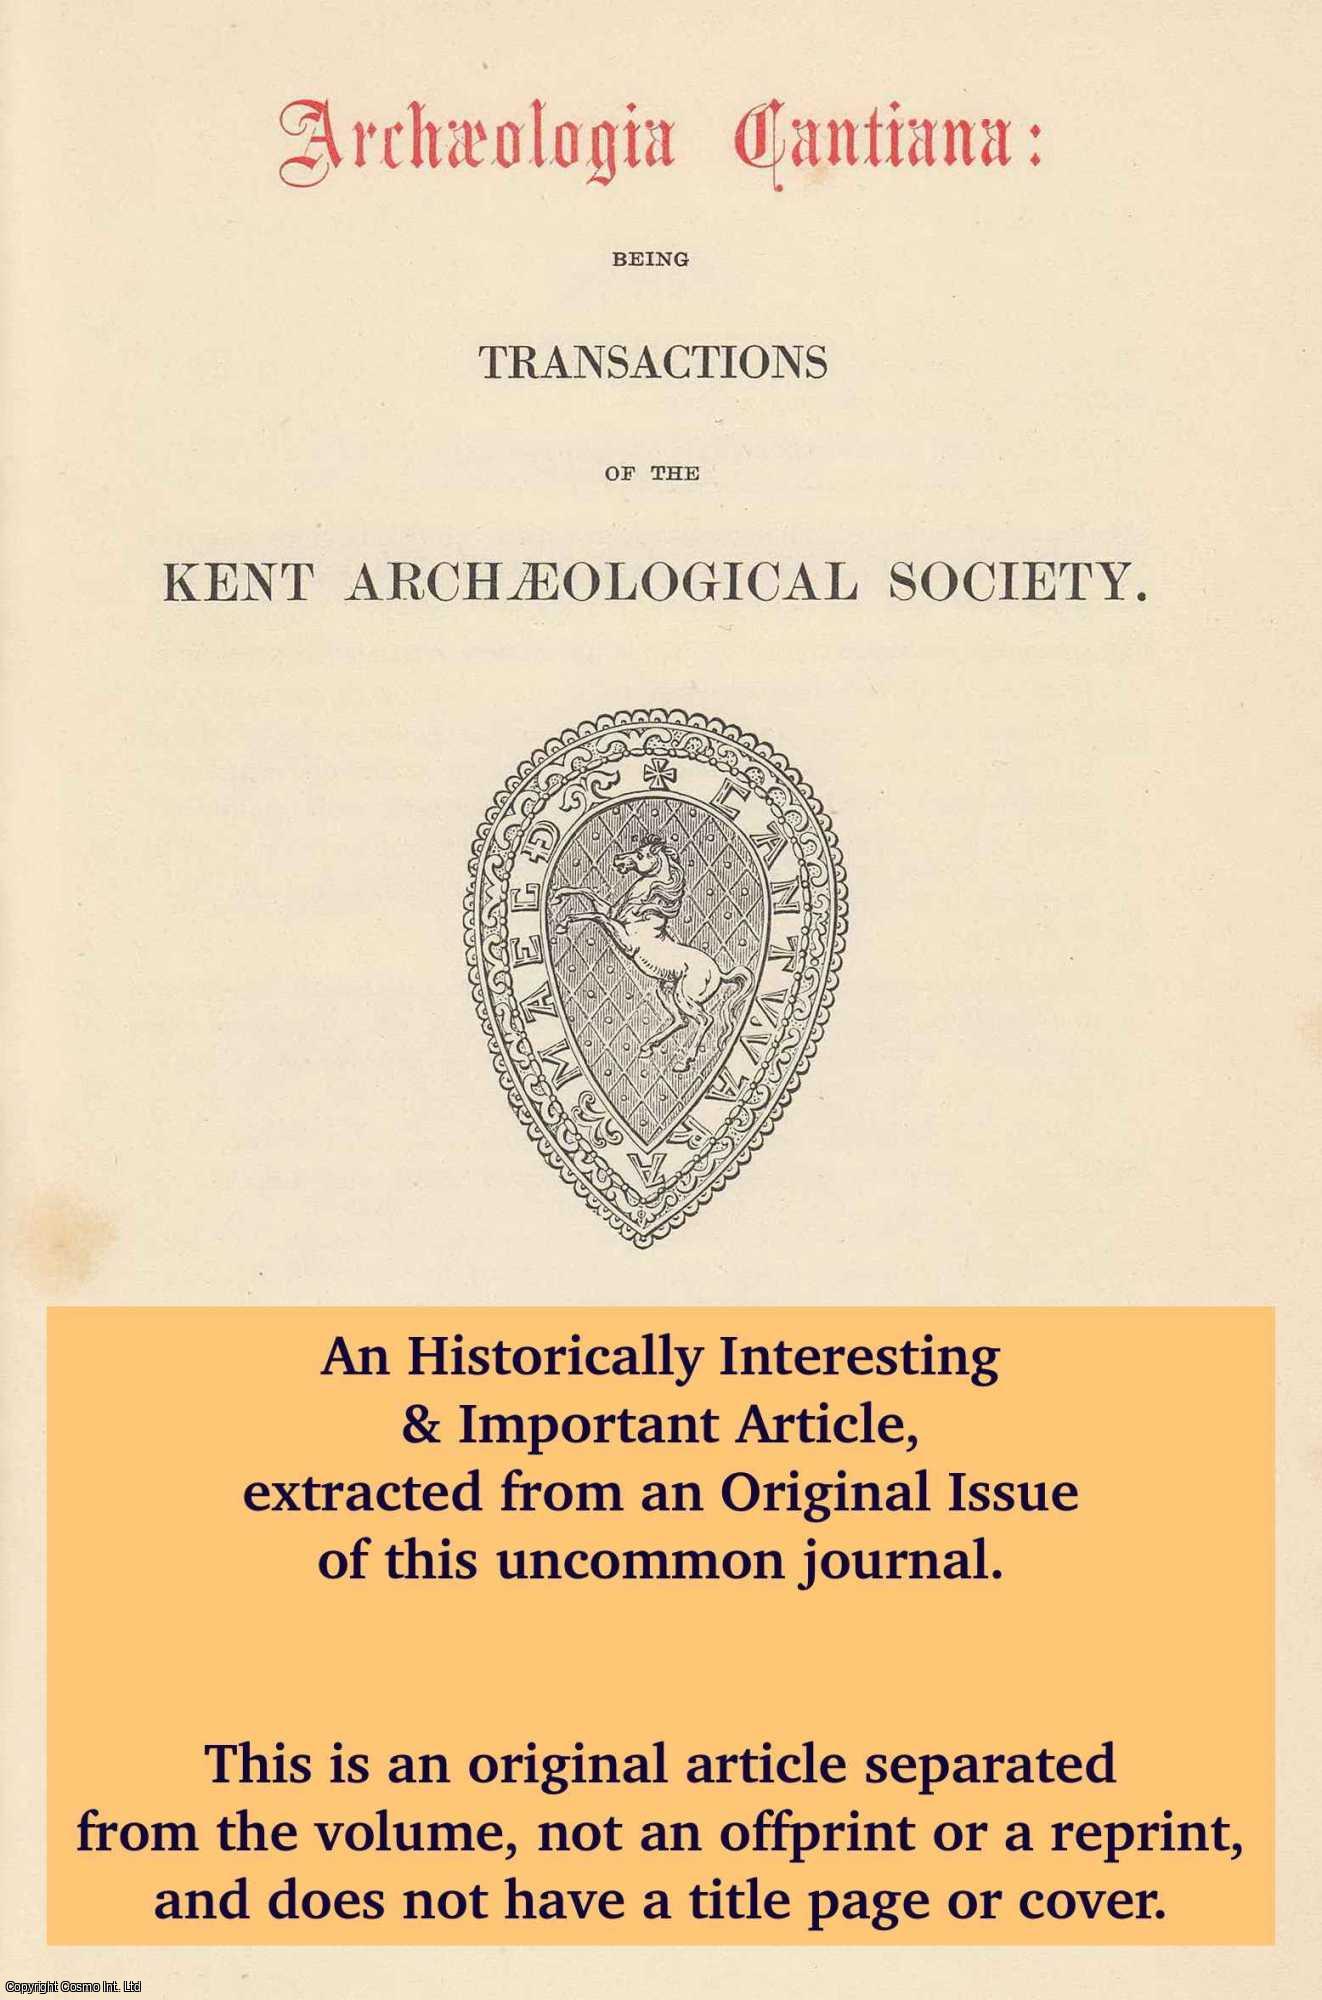 R.F. Jessup - Early Bronze Age Beakers. An original article from The Archaeologia Cantiana: Transactions of The Kent Archaeological Society, 1933.